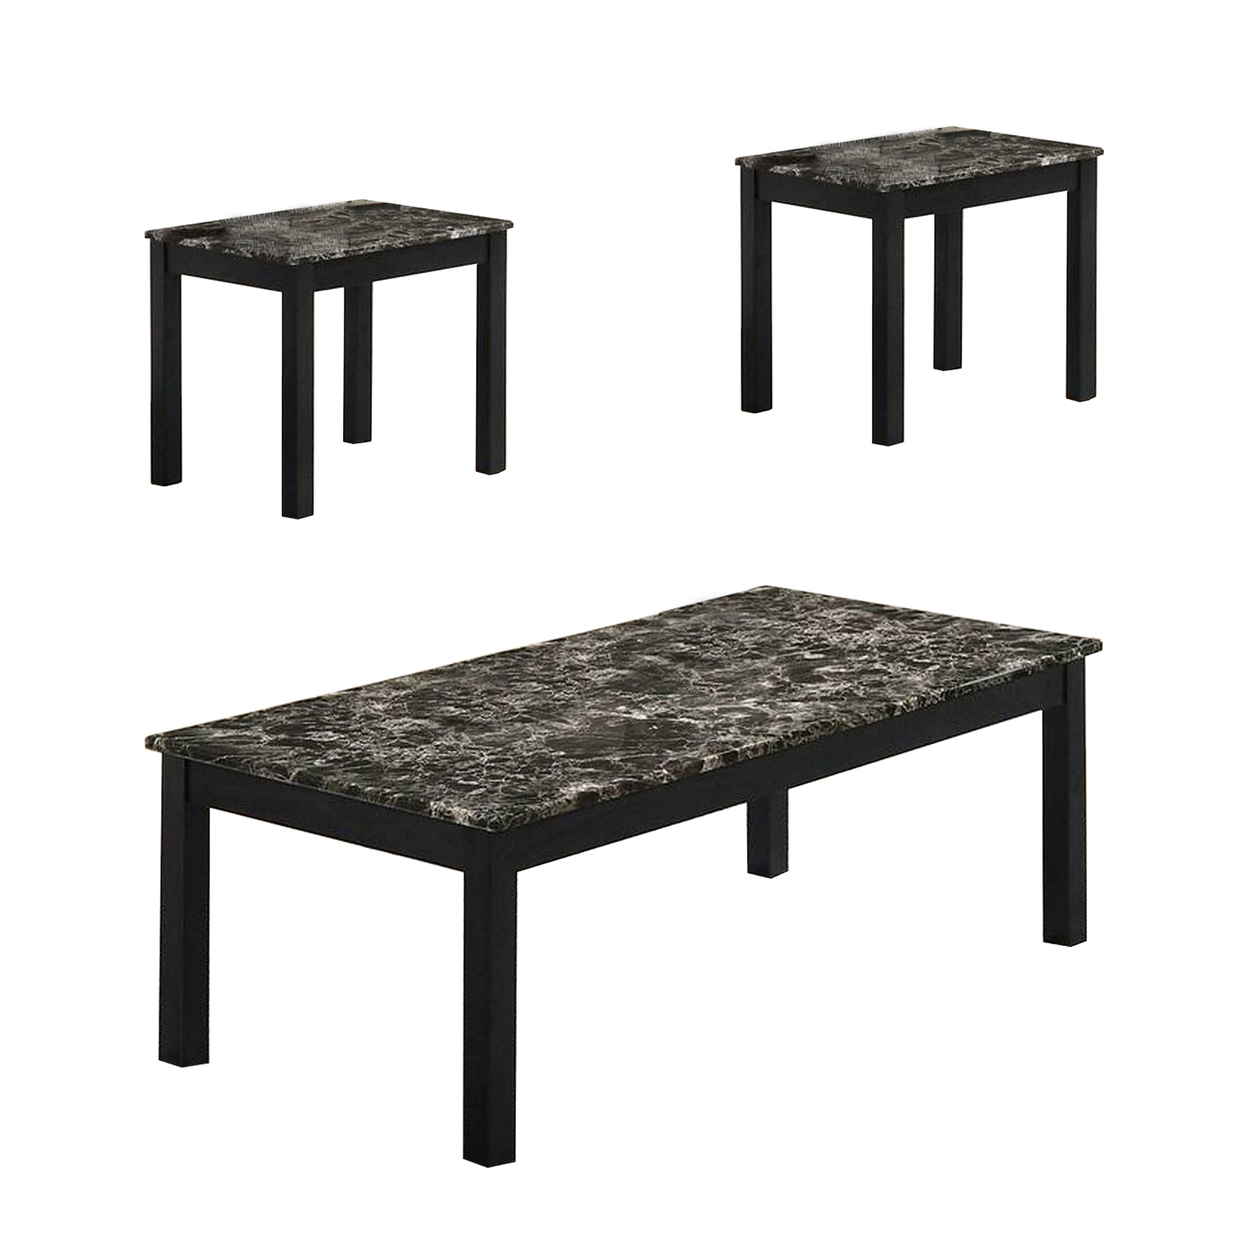 3 Piece Coffee Table And End Table With Faux Marble Top, Black- Saltoro Sherpi